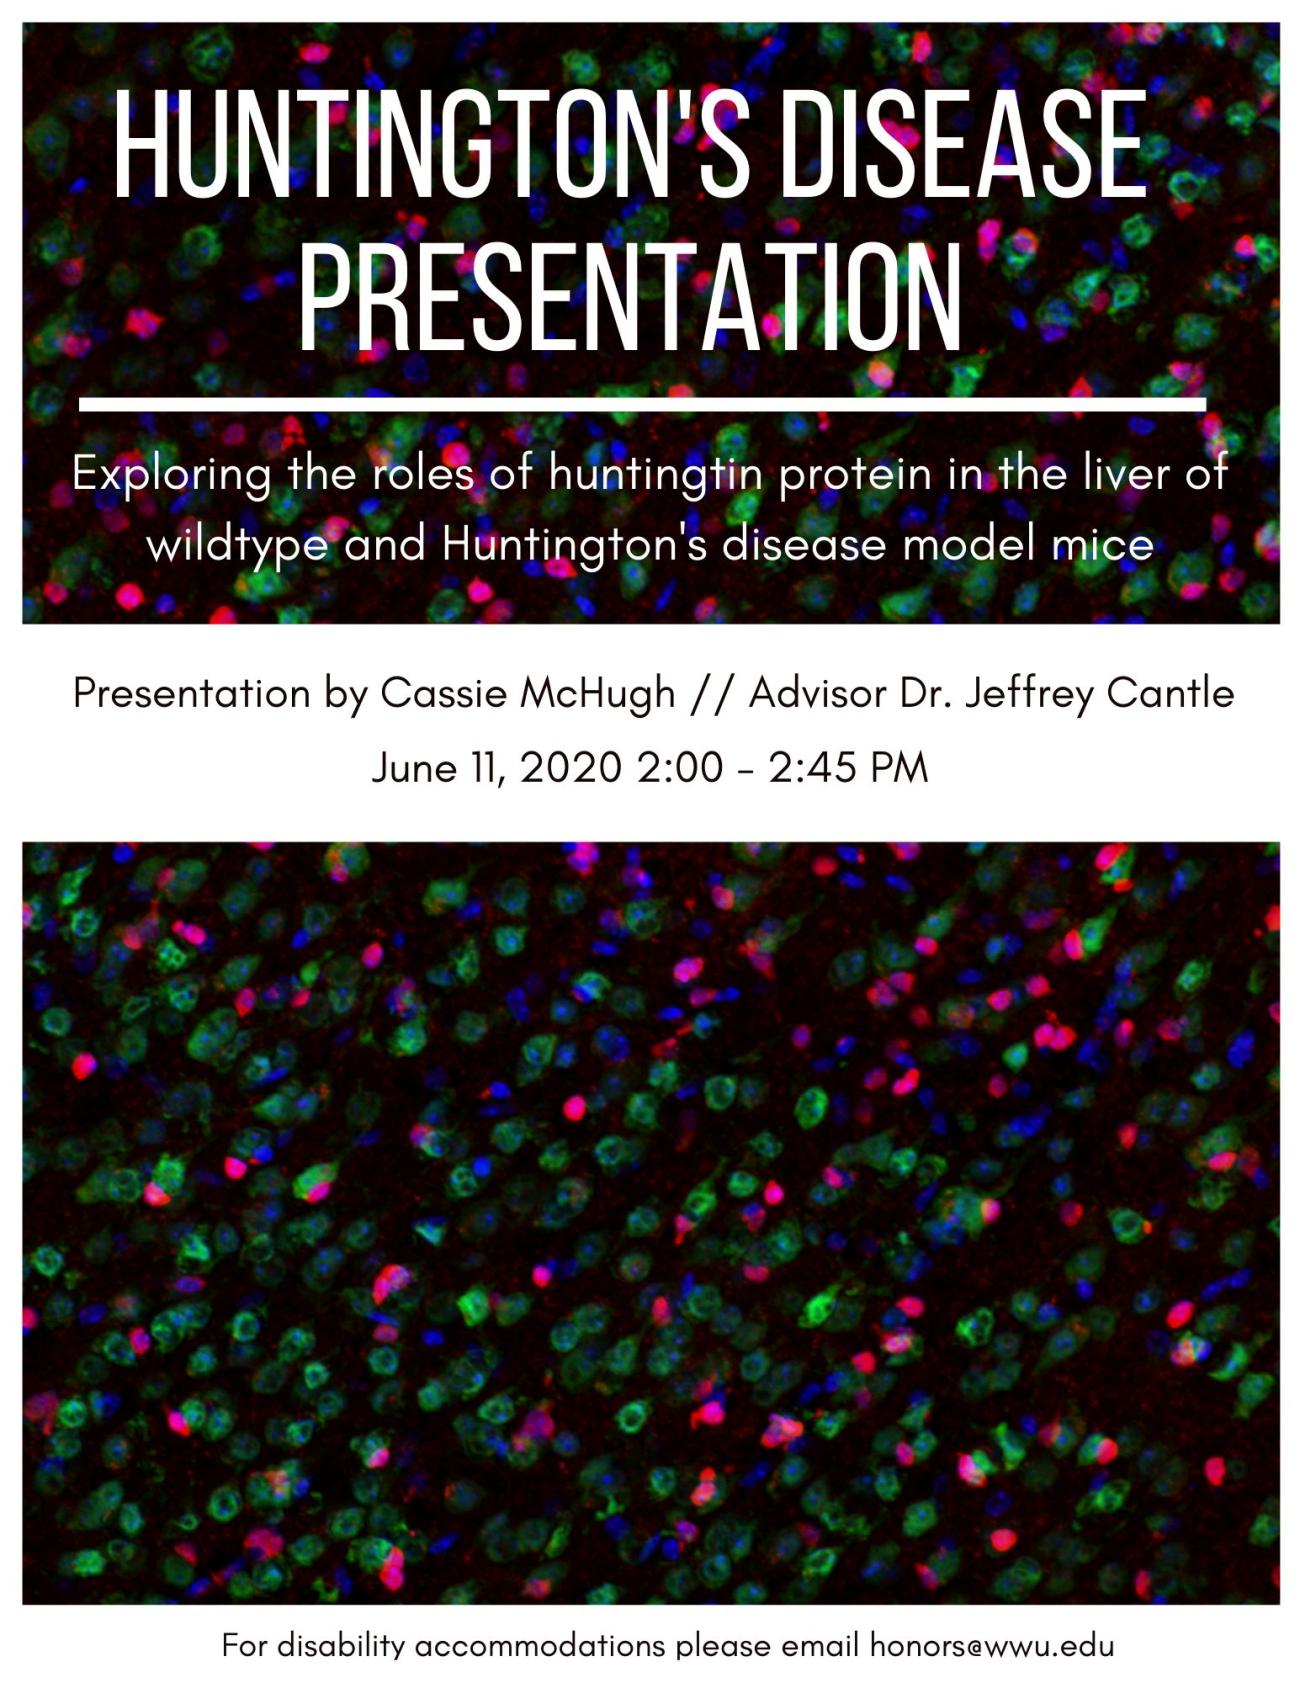 Text: "Huntington's disease presentation. Exploring the roles of huntingtin protein in the liver of wildtype and Huntington's disease model mice. Presentation by Cassie McHugh // Advisor Dr. Jeffrey Cantle. June 11, 2020 2:00-2:45 PM. For disability accommodations please email honors@wwu.edu."